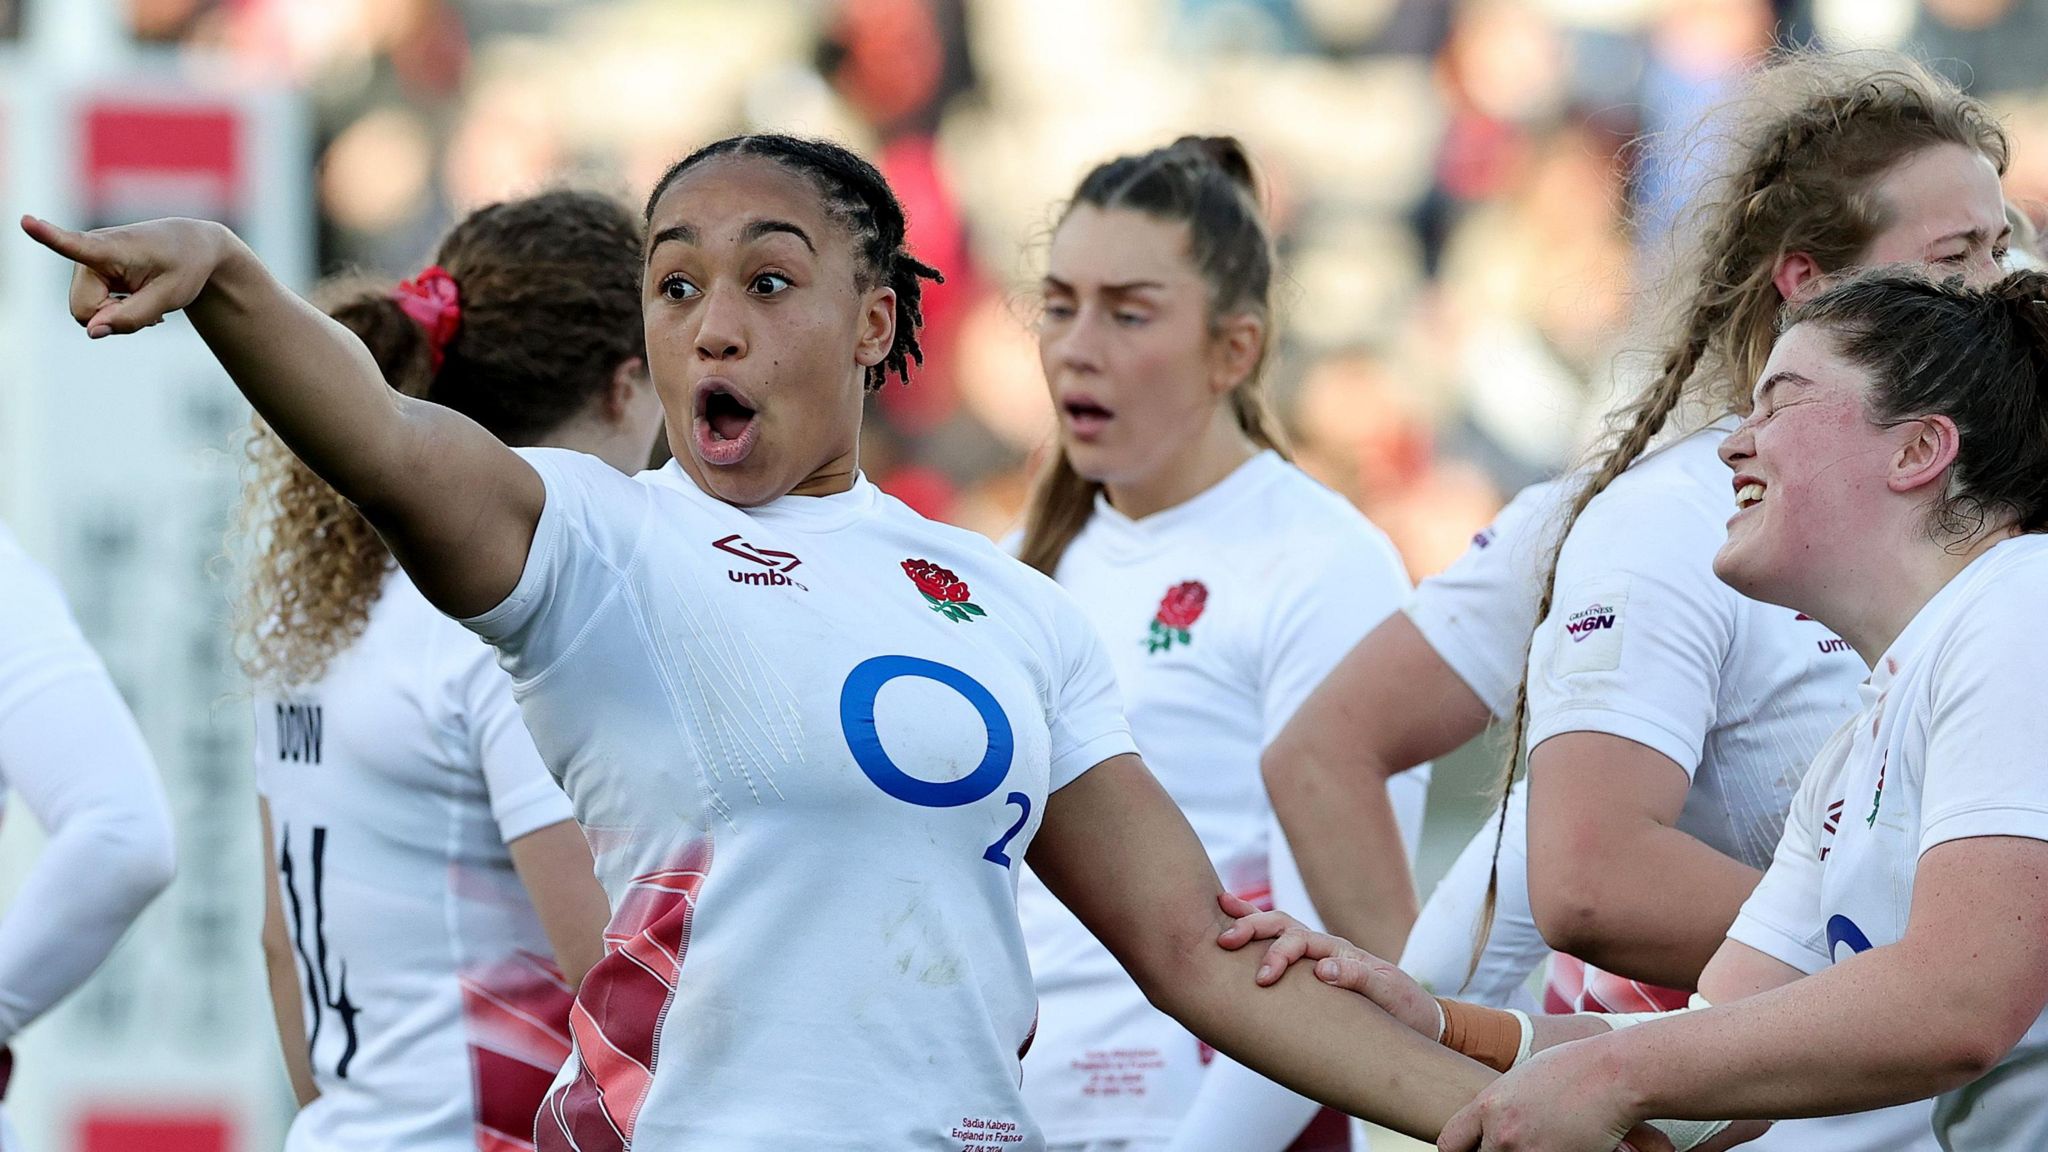 Sadia Kabeya points and shouts while in action for England